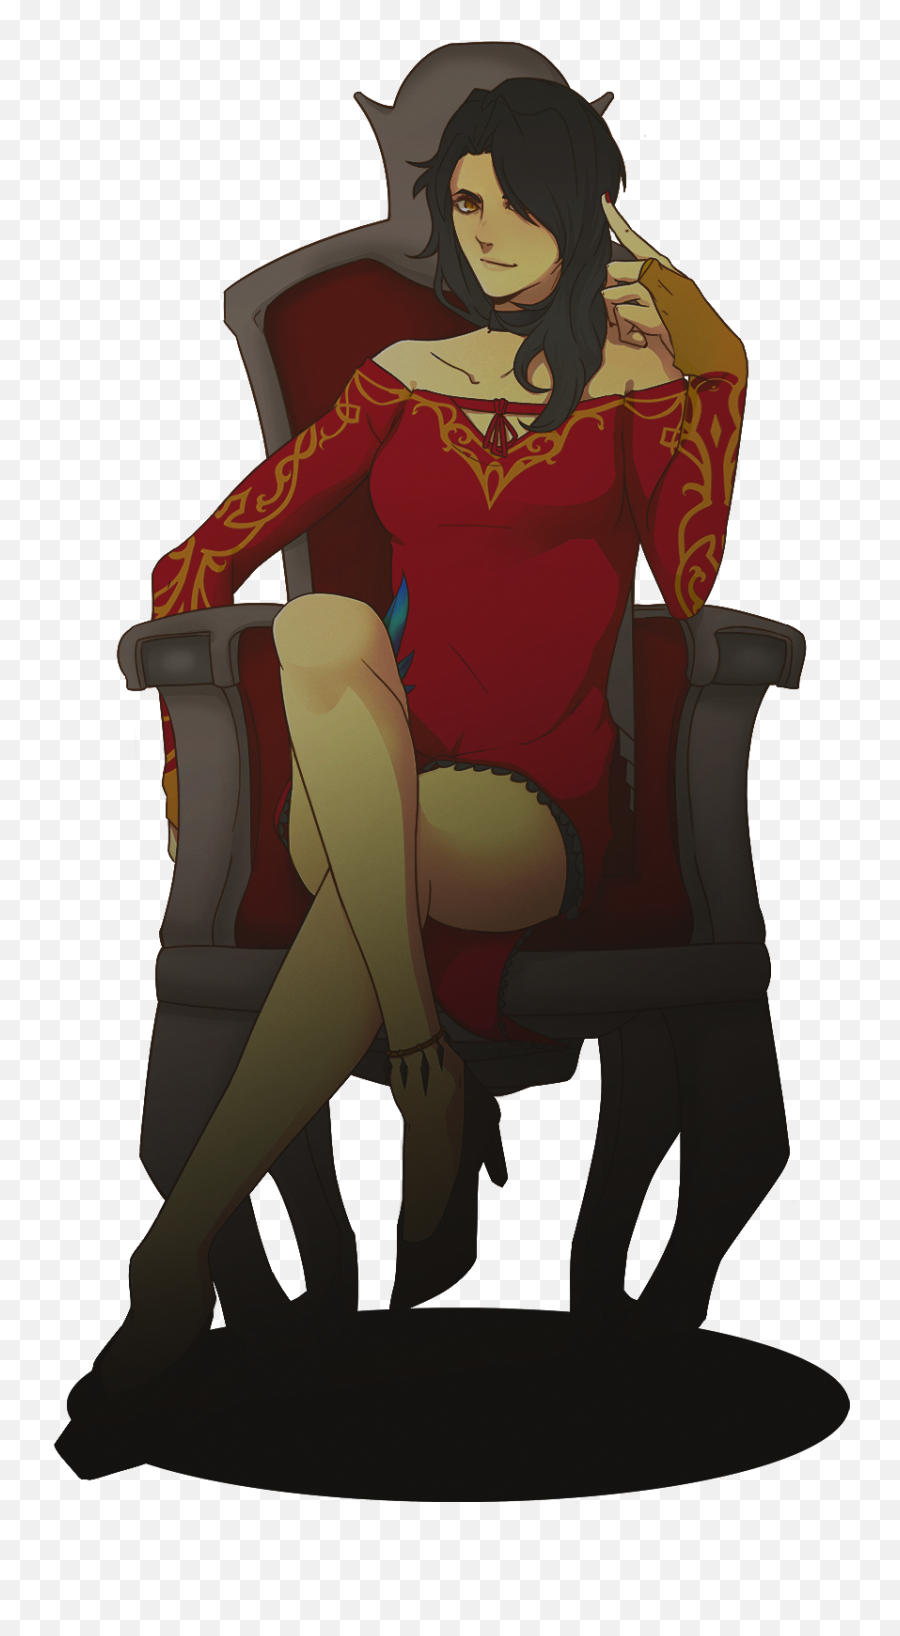 The Nefarious Queen Upon Her Throne Cinderdidnothingwrong Emoji,Throne Transparent